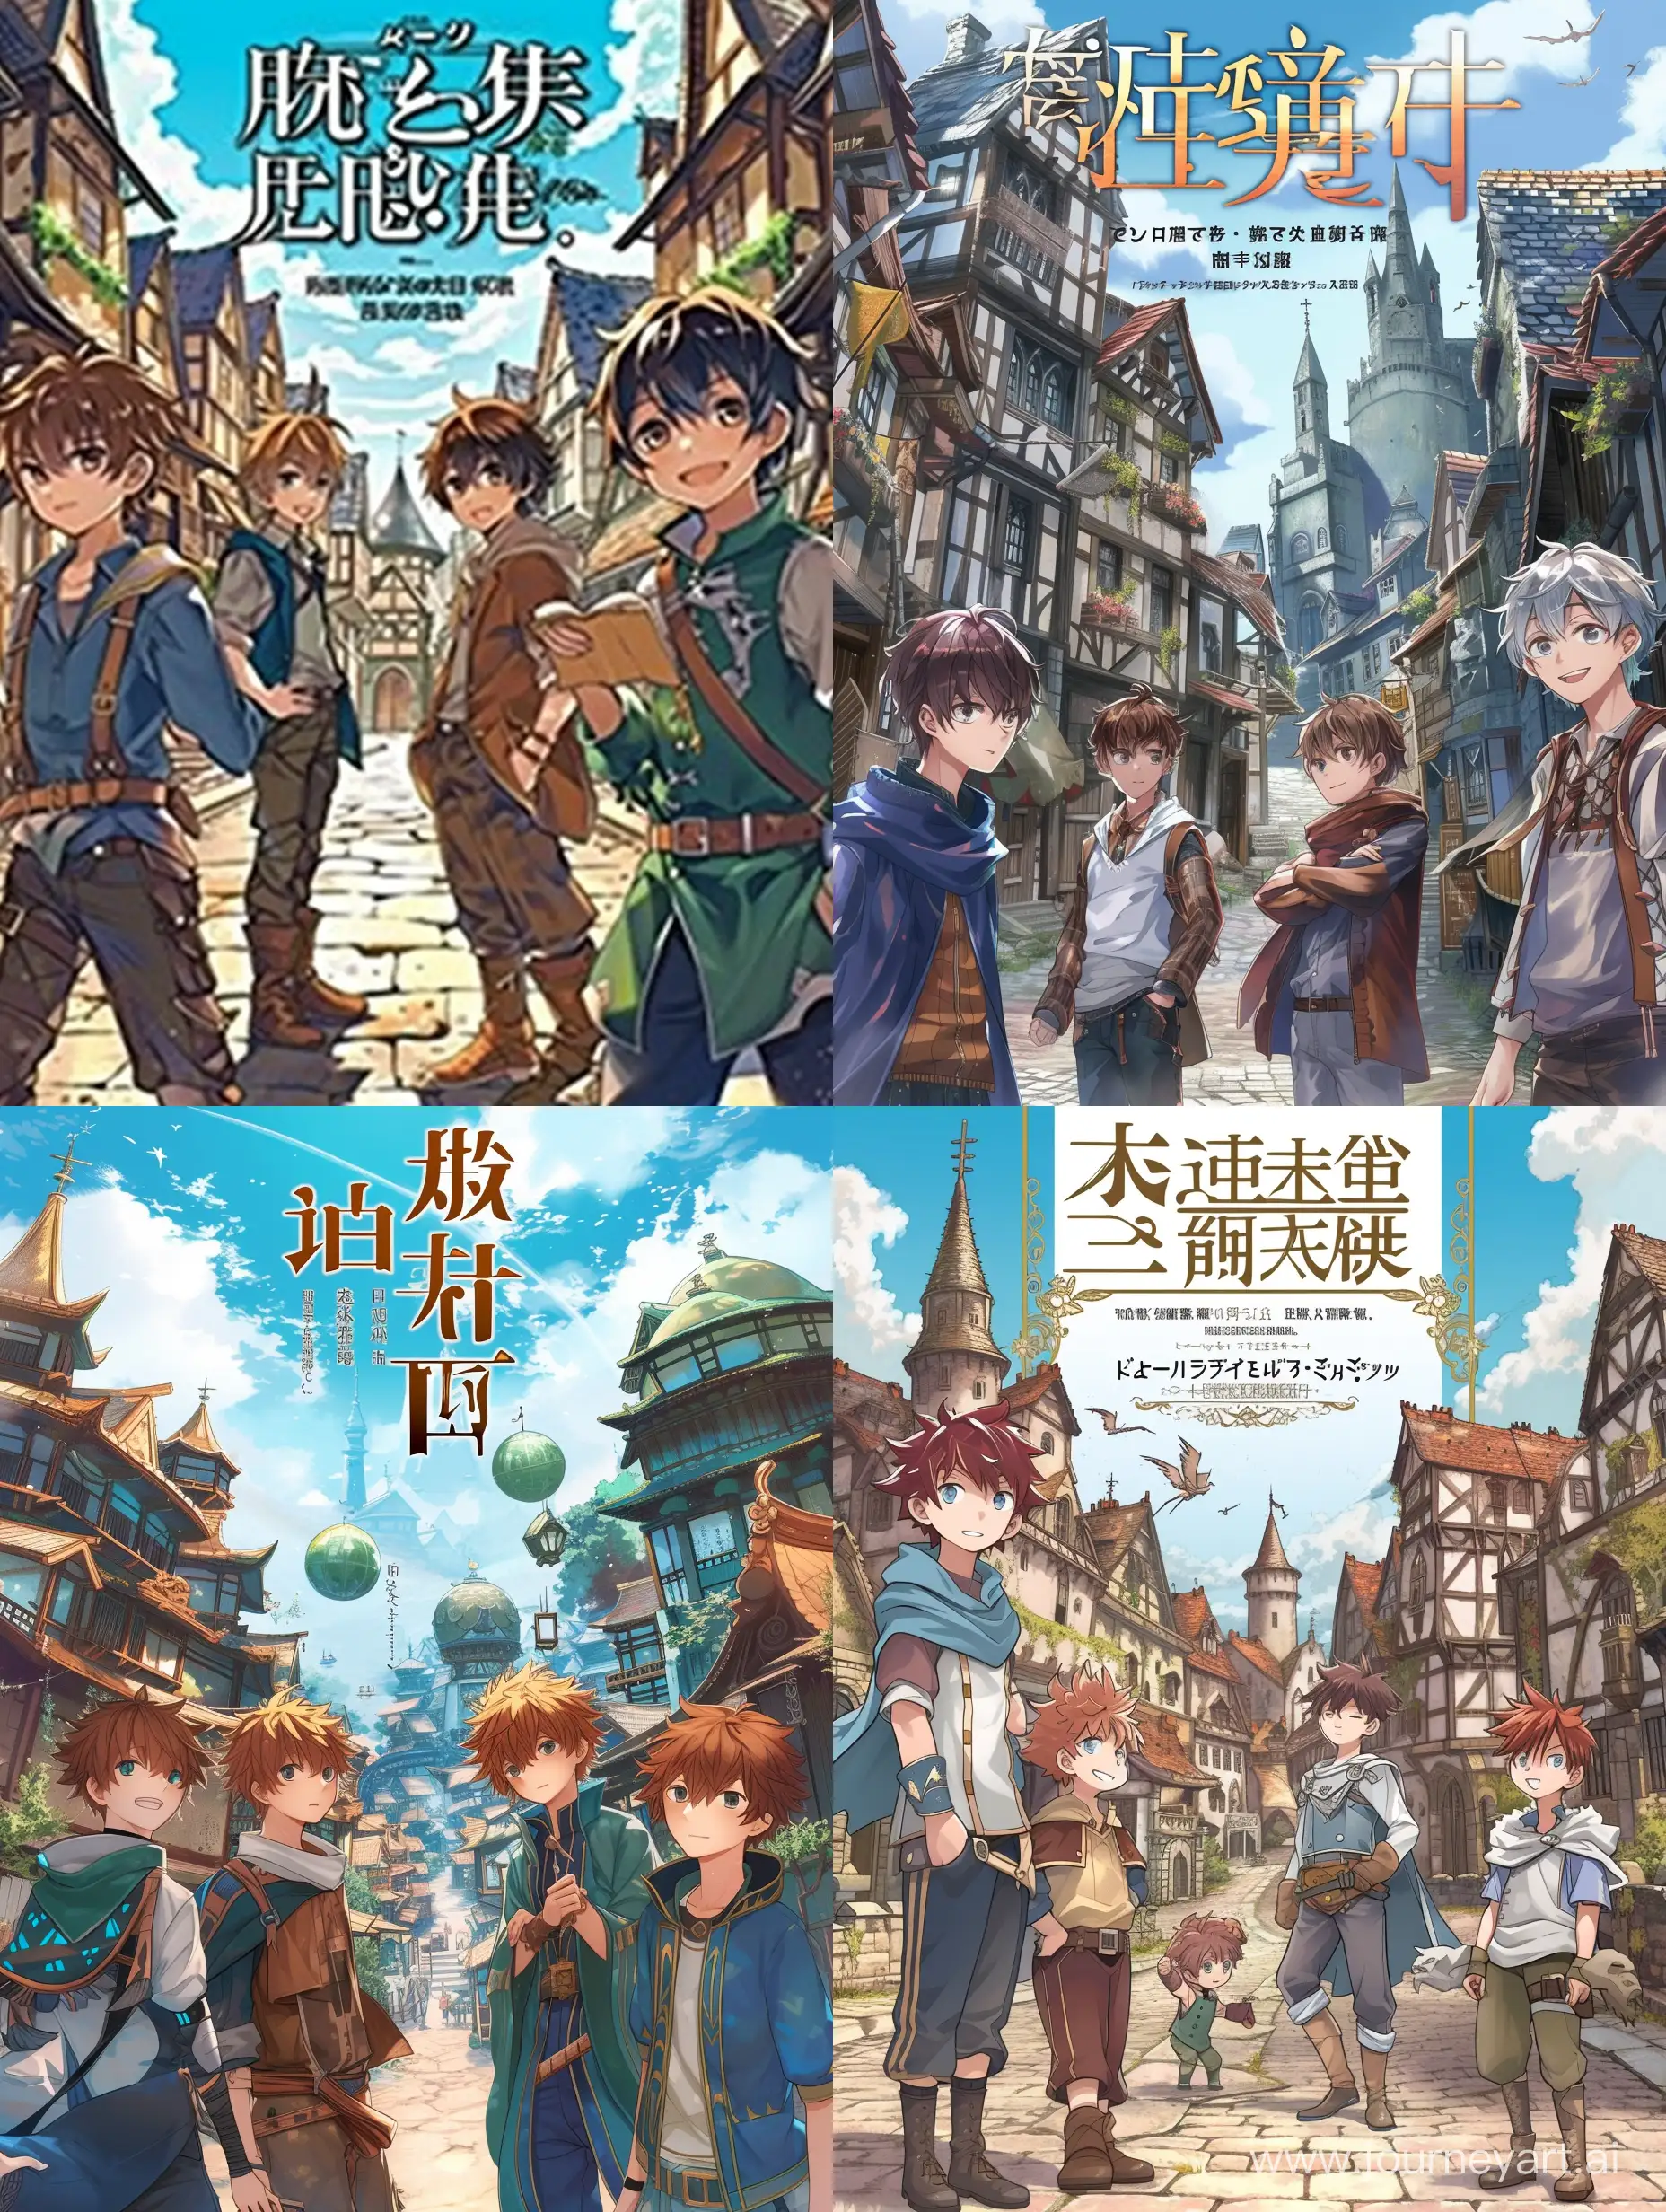 Four-Boys-Adventure-in-a-Fantasy-World-with-Buildings-Fantasy-Isekai-Light-Novel-Cover